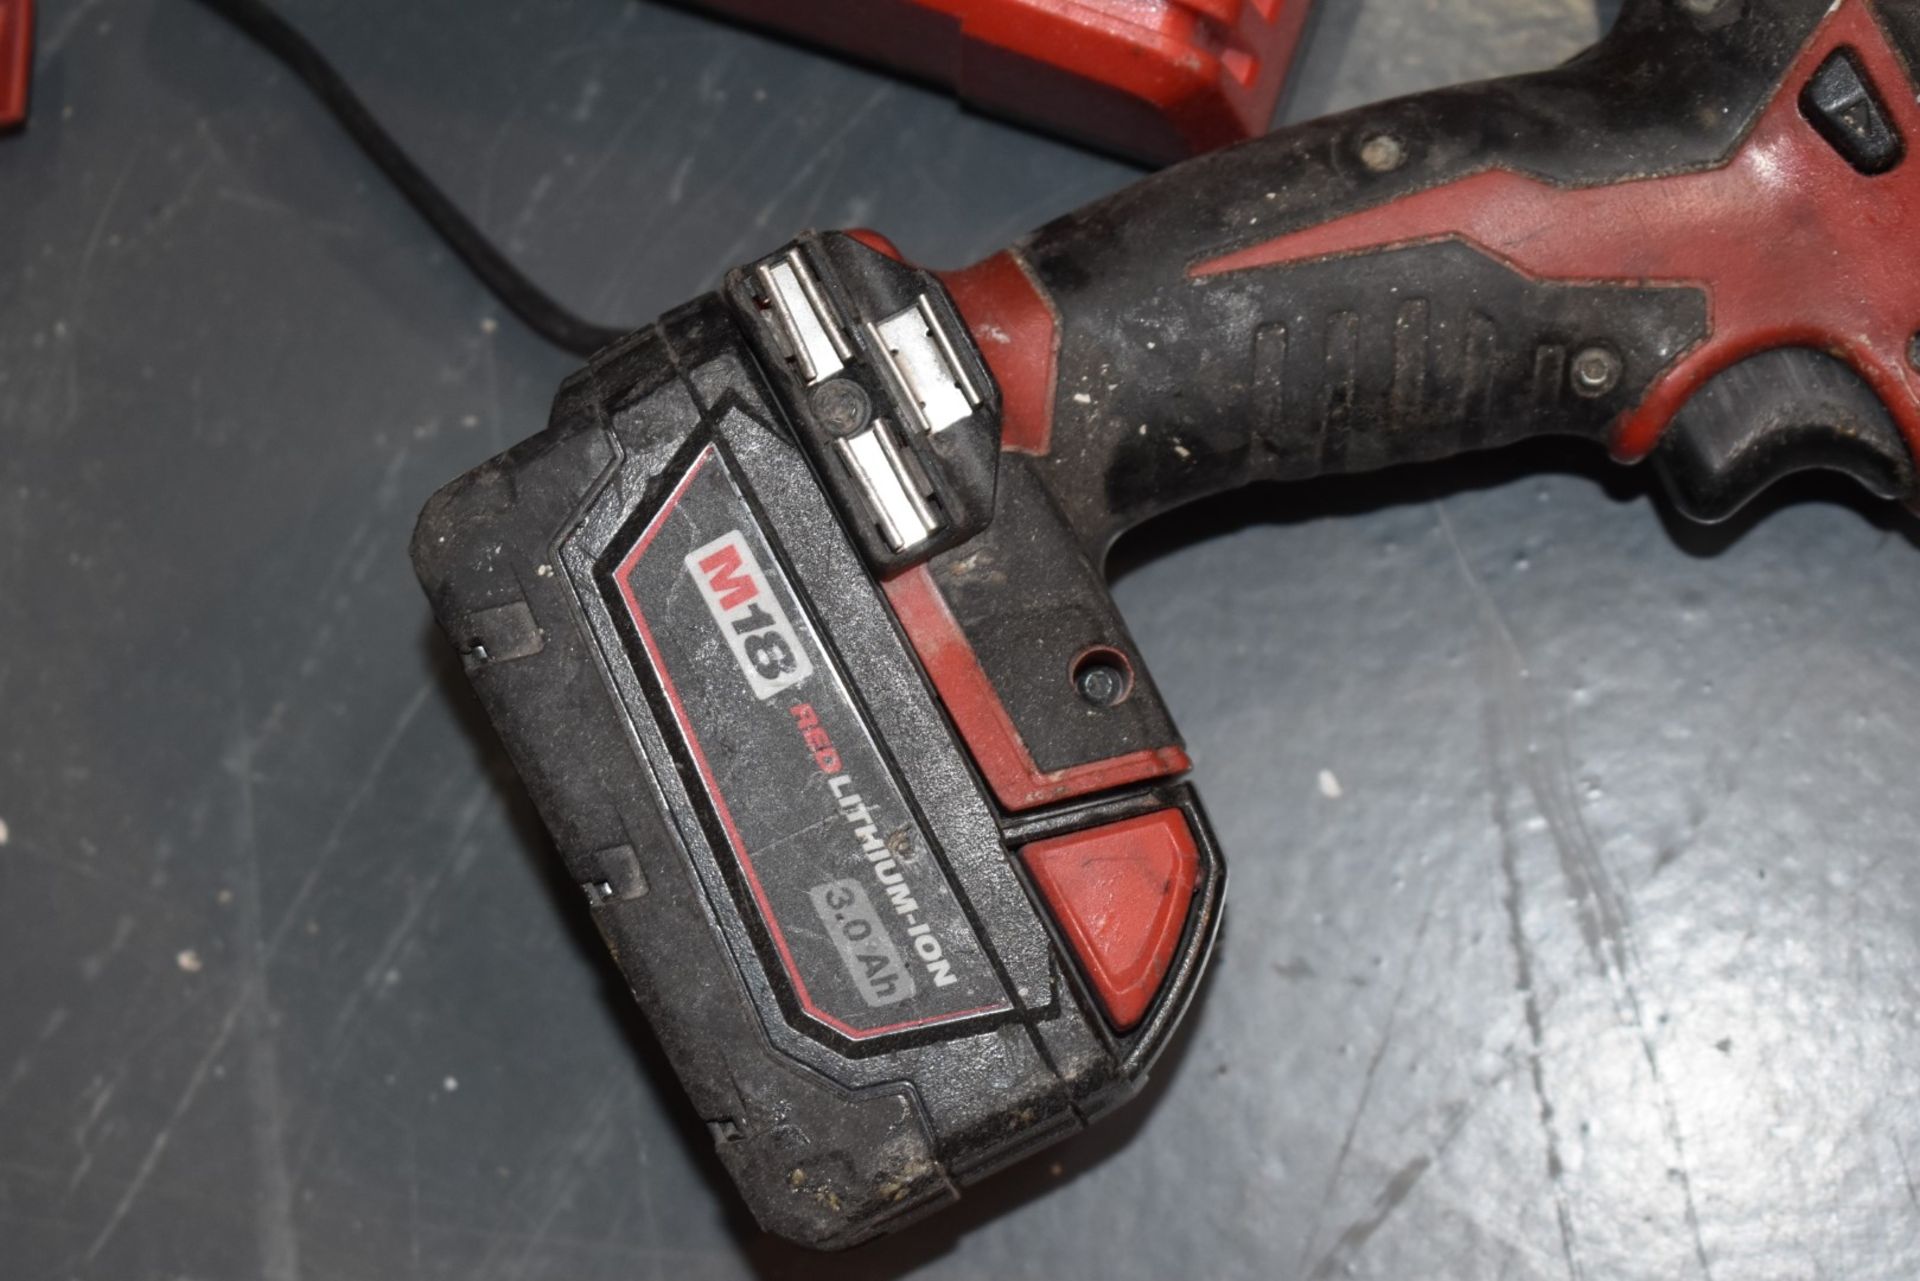 1 x Milwaukee Cordless Heavy Duty Drill Set - Includes 2 x Drills, 2 x Batteries and 1 x Charger - - Bild 3 aus 7